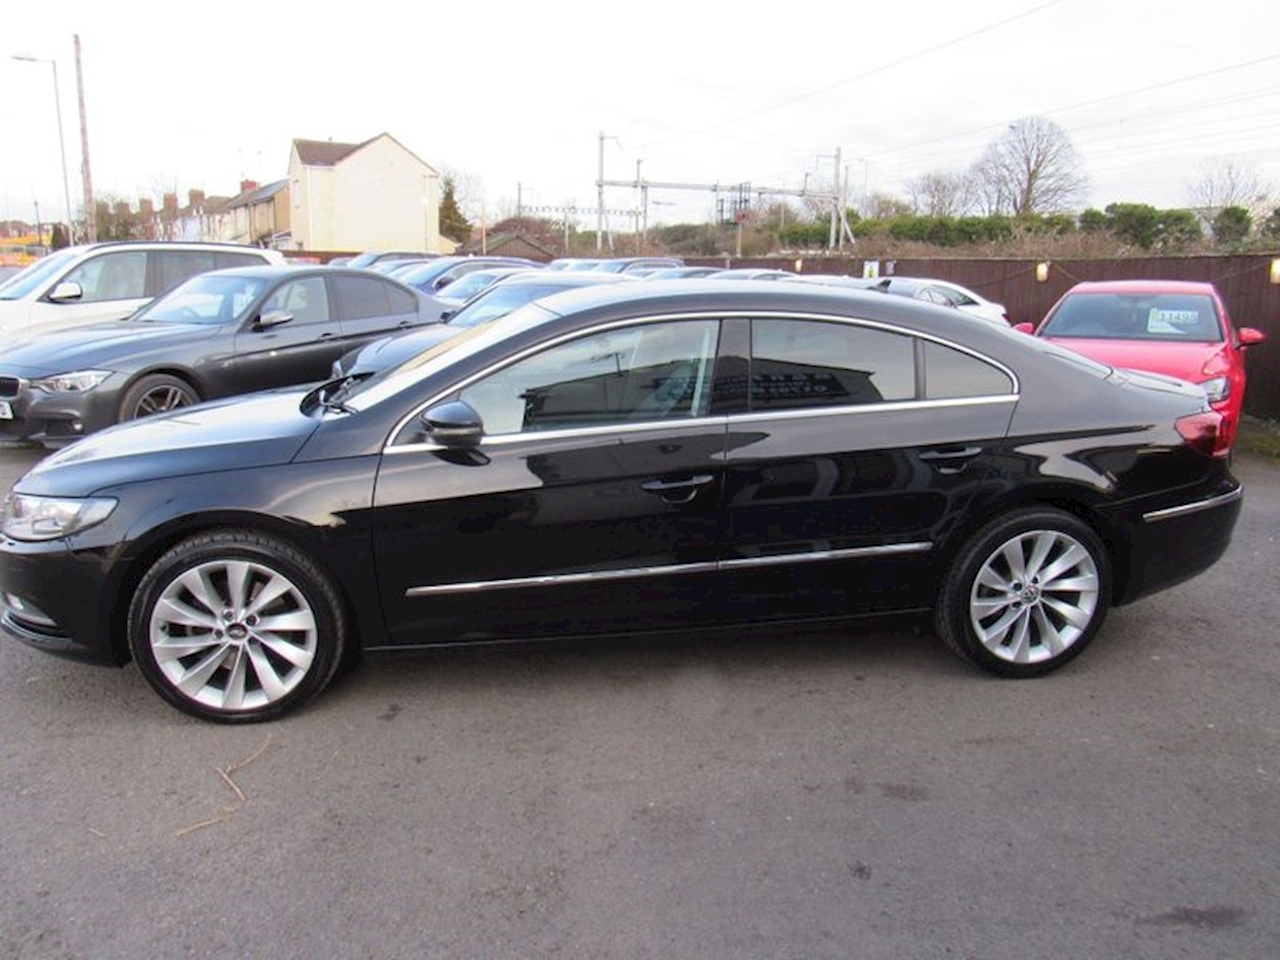 Cc Gt Tdi Bluemotion Technology Coupe 2.0 Manual Diesel